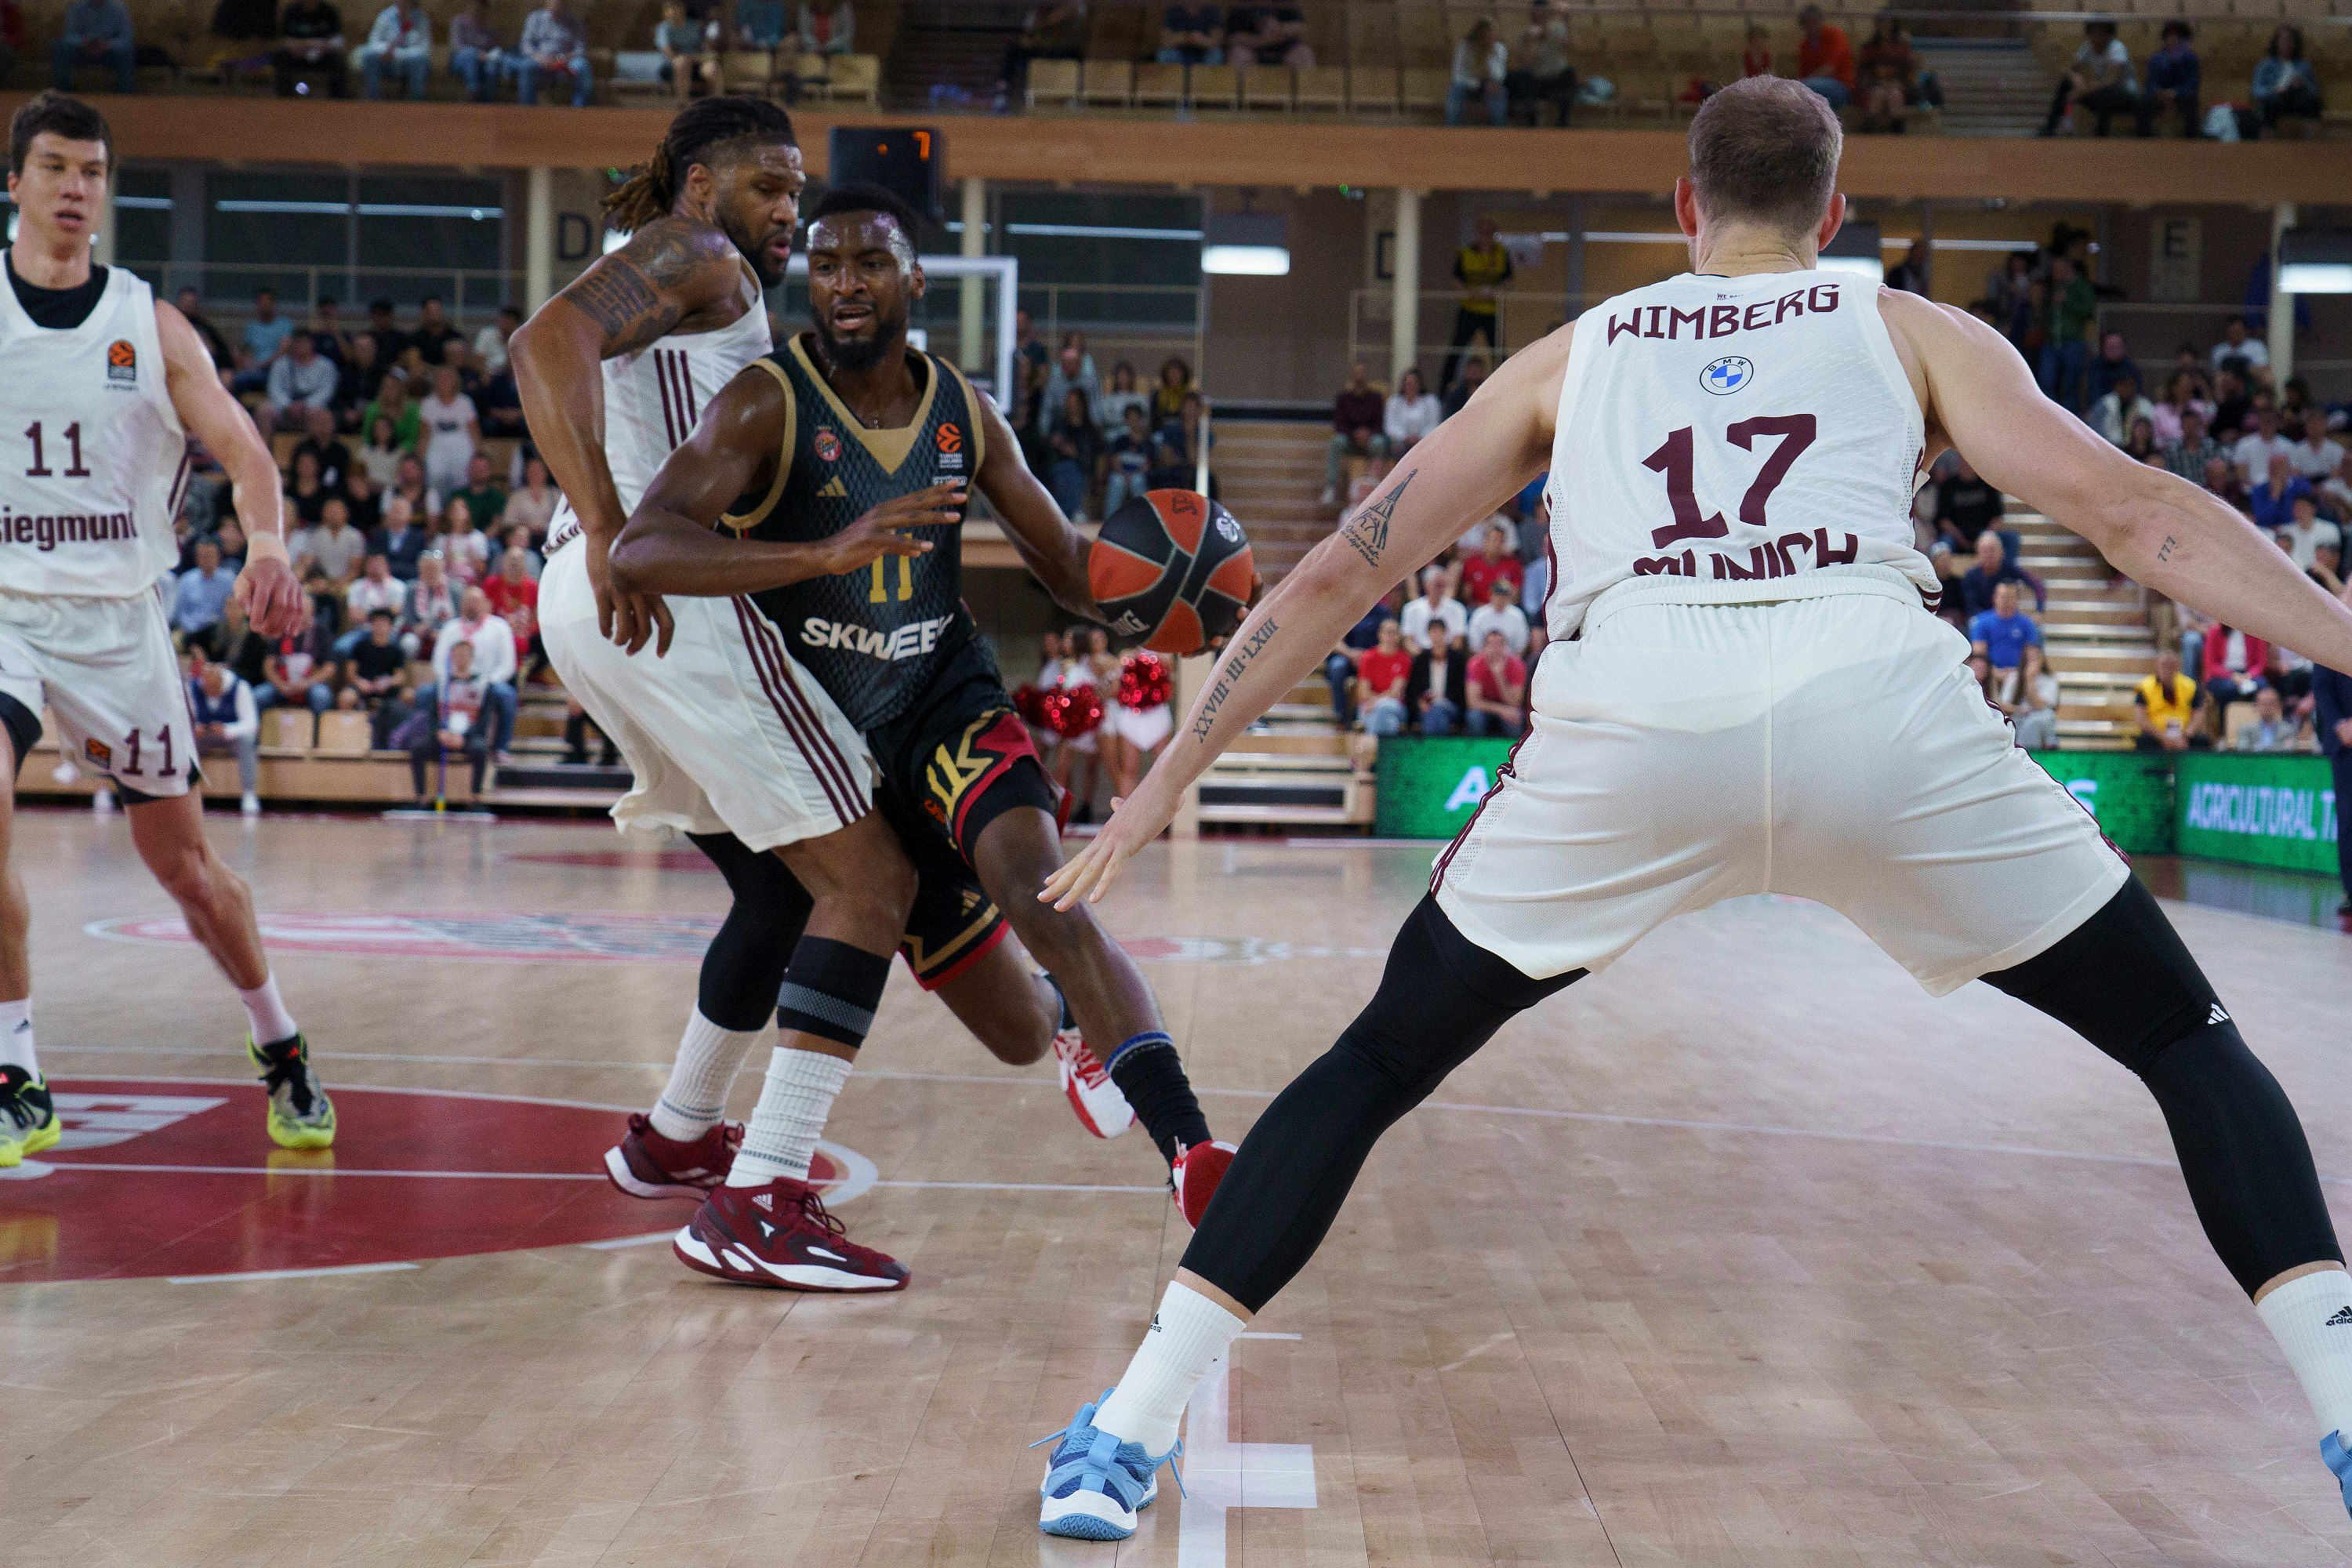 Basketball: Monaco barely beats Bayern and secures the Top 3 in the Euroleague